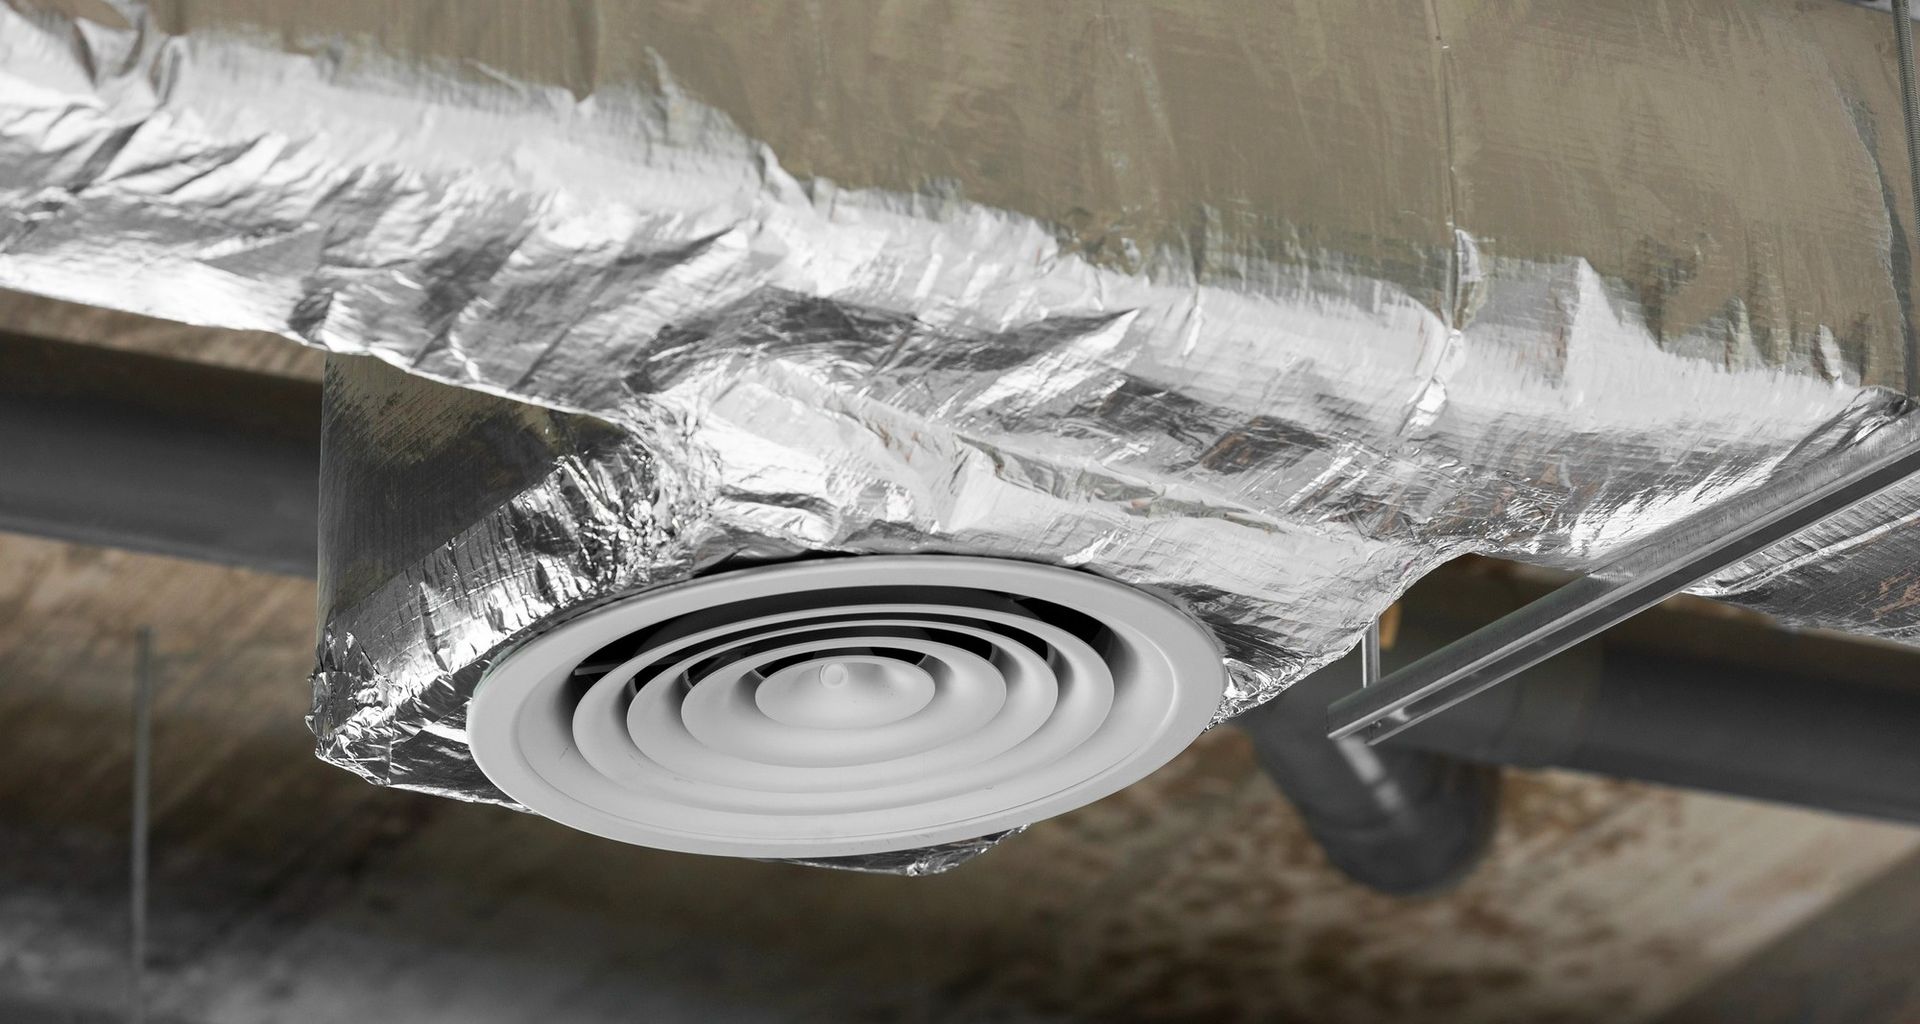 Air duct sealing is often overlooked but plays an important role in HVAC maintenance